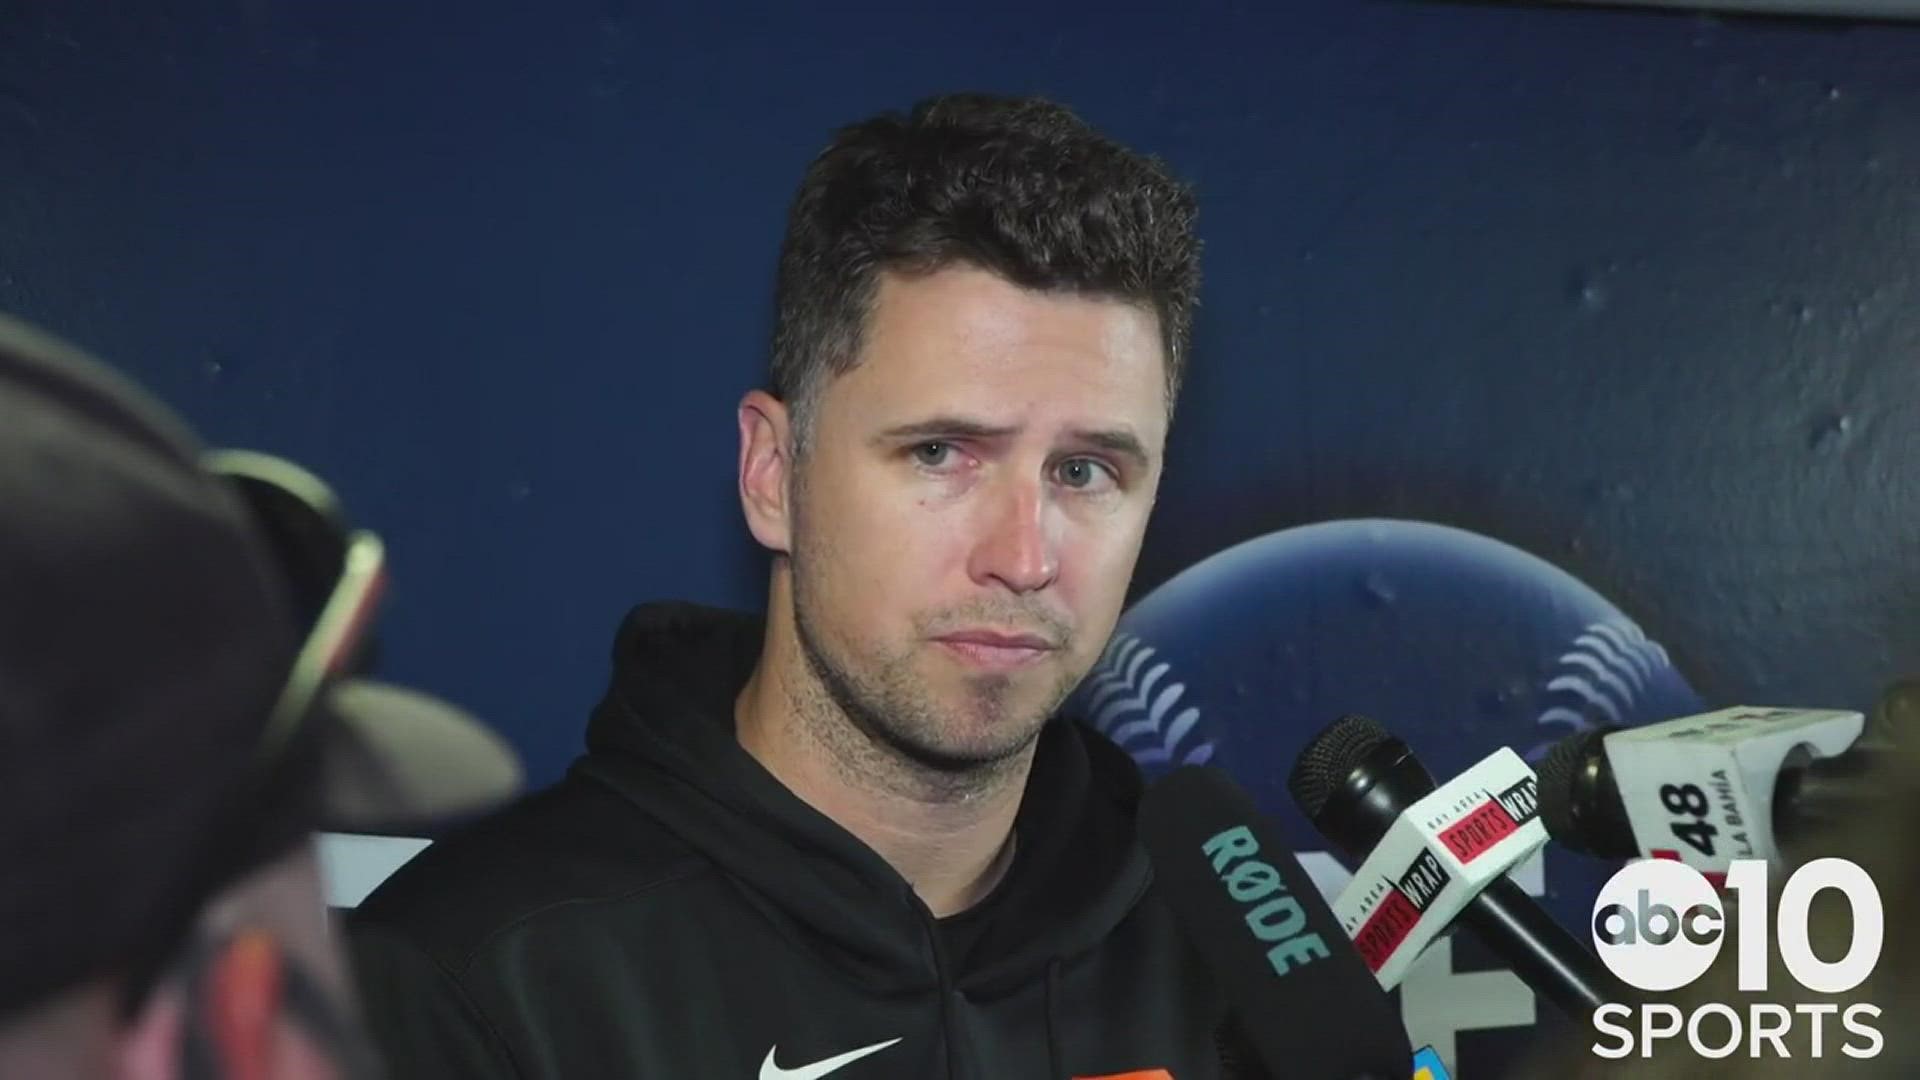 Following a Game 5 filled with so much drama, San Francisco Giants catcher Buster Posey gives his thoughts on the series ending loss to the LA Dodgers in the NLDS.